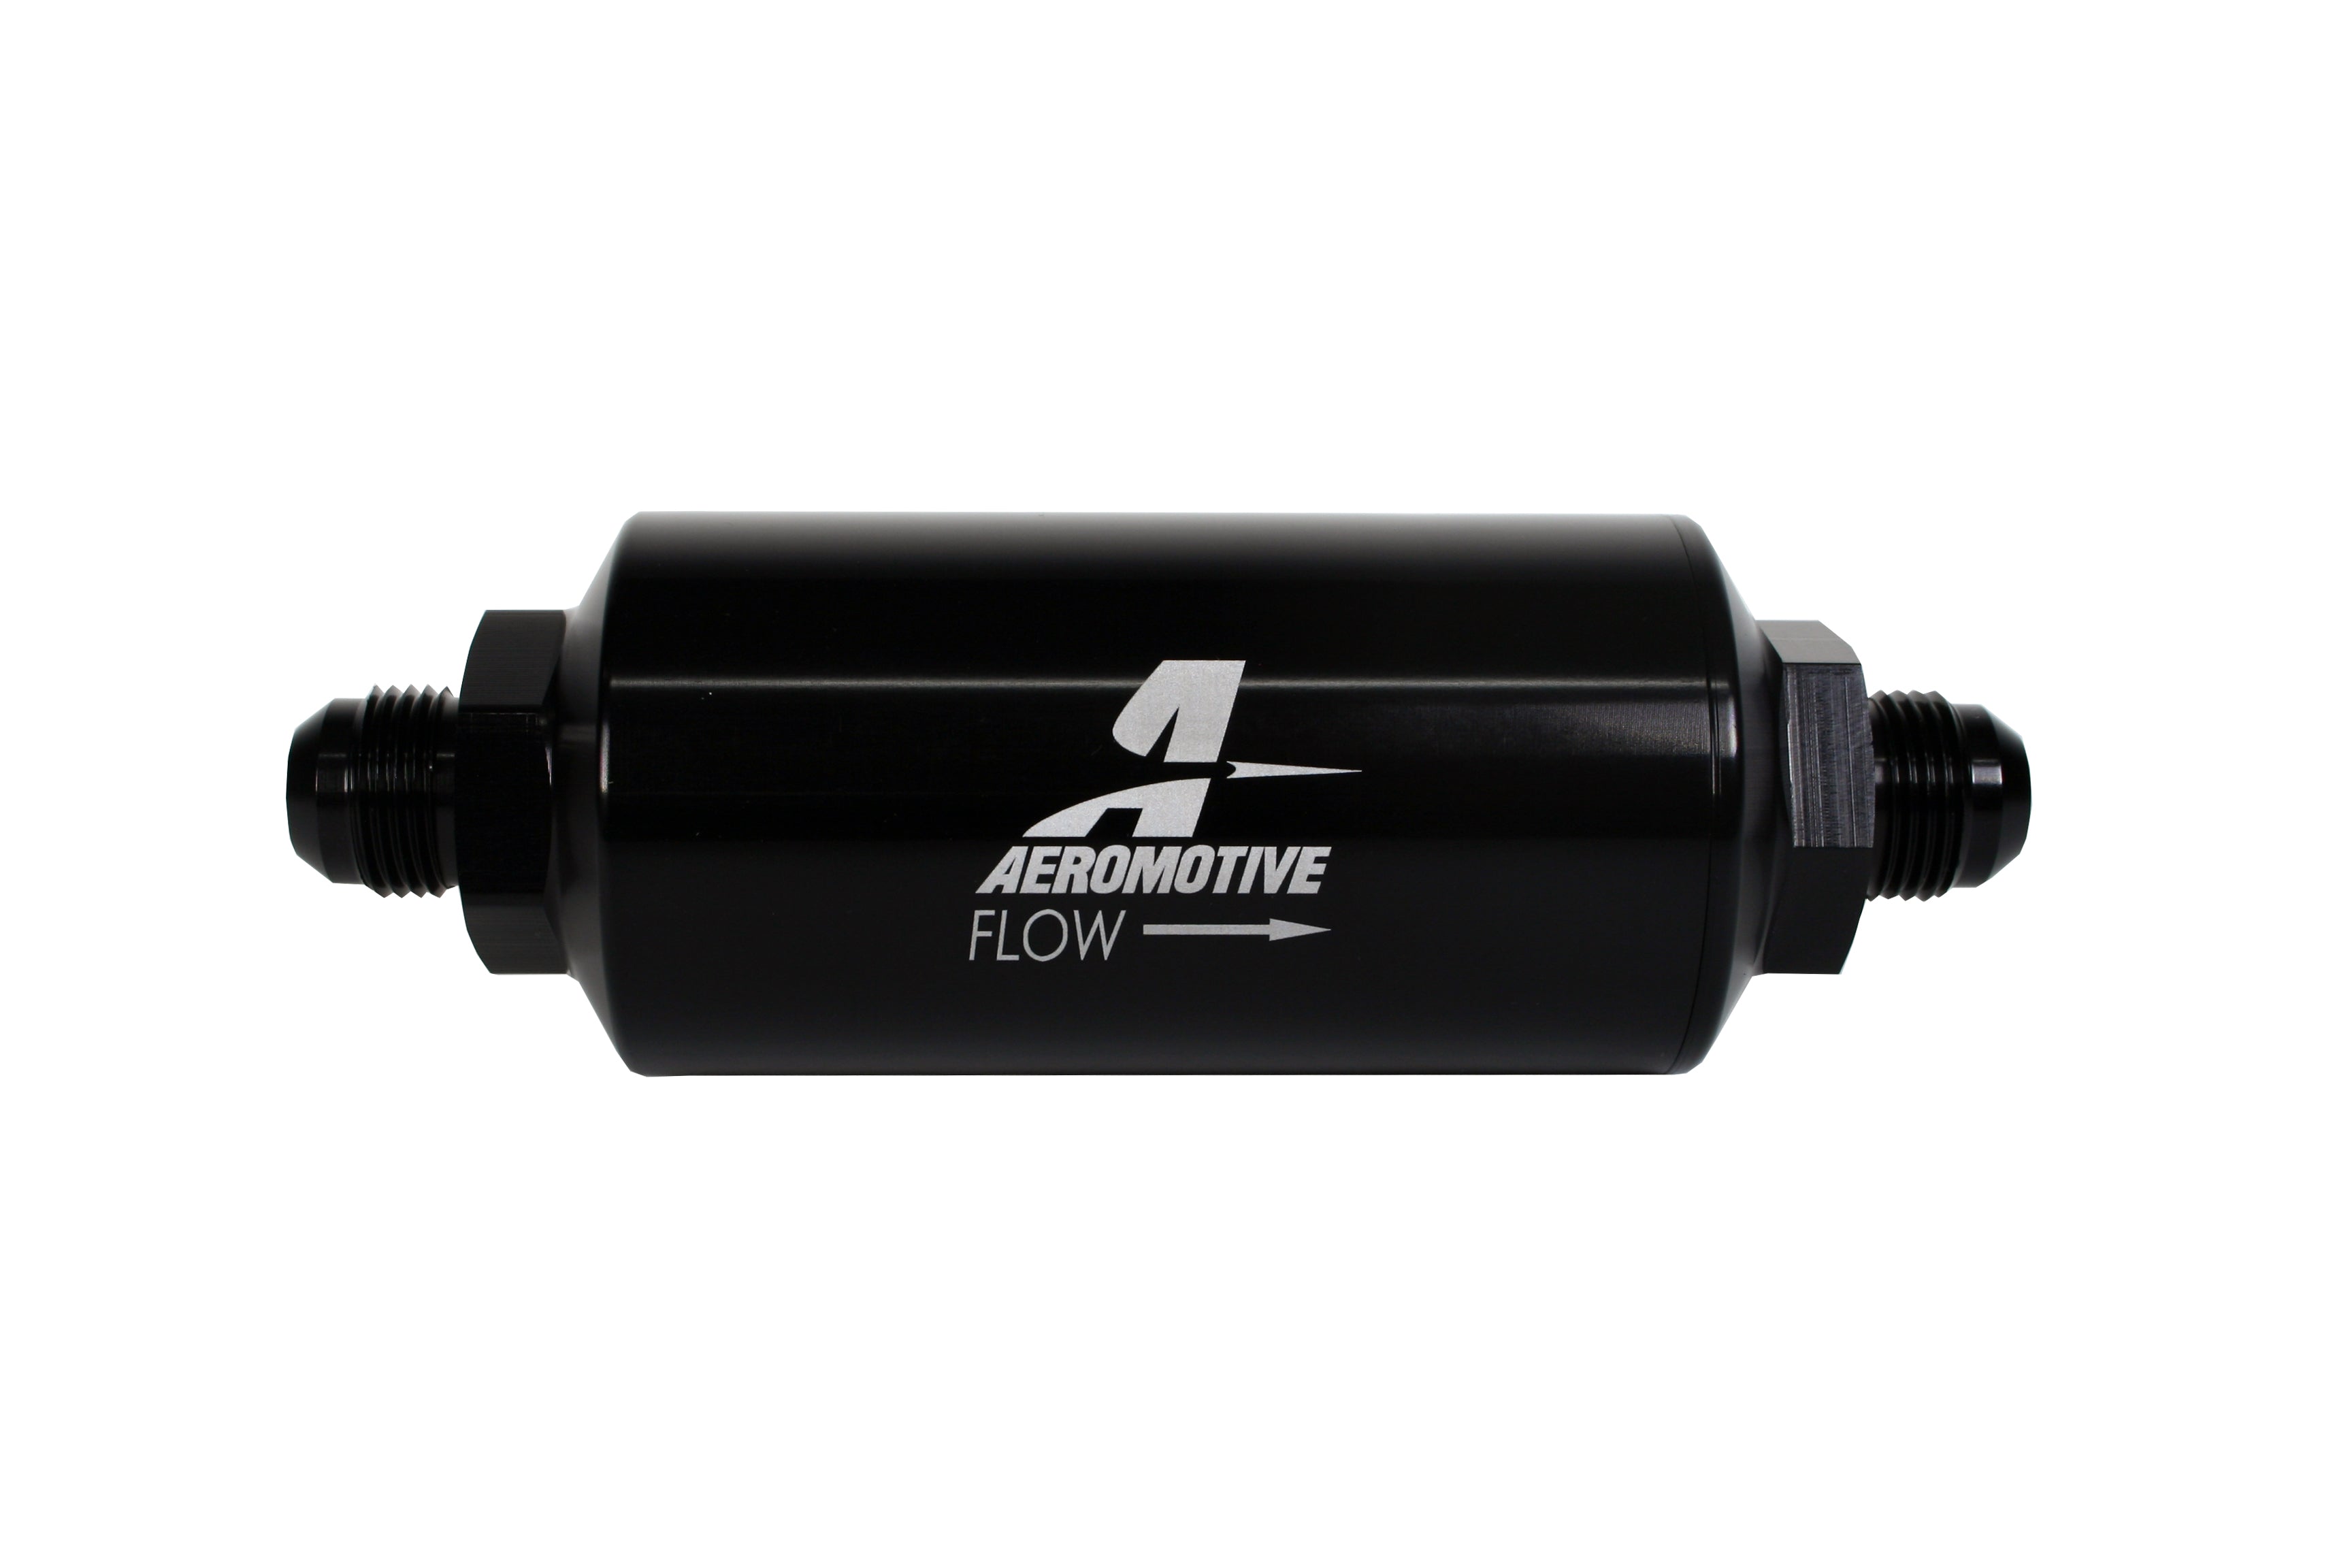 AEROMOTIVE 12378 40-Micron Stainless Steel Filter Element, black anodize finish, AN-08 Male Photo-1 